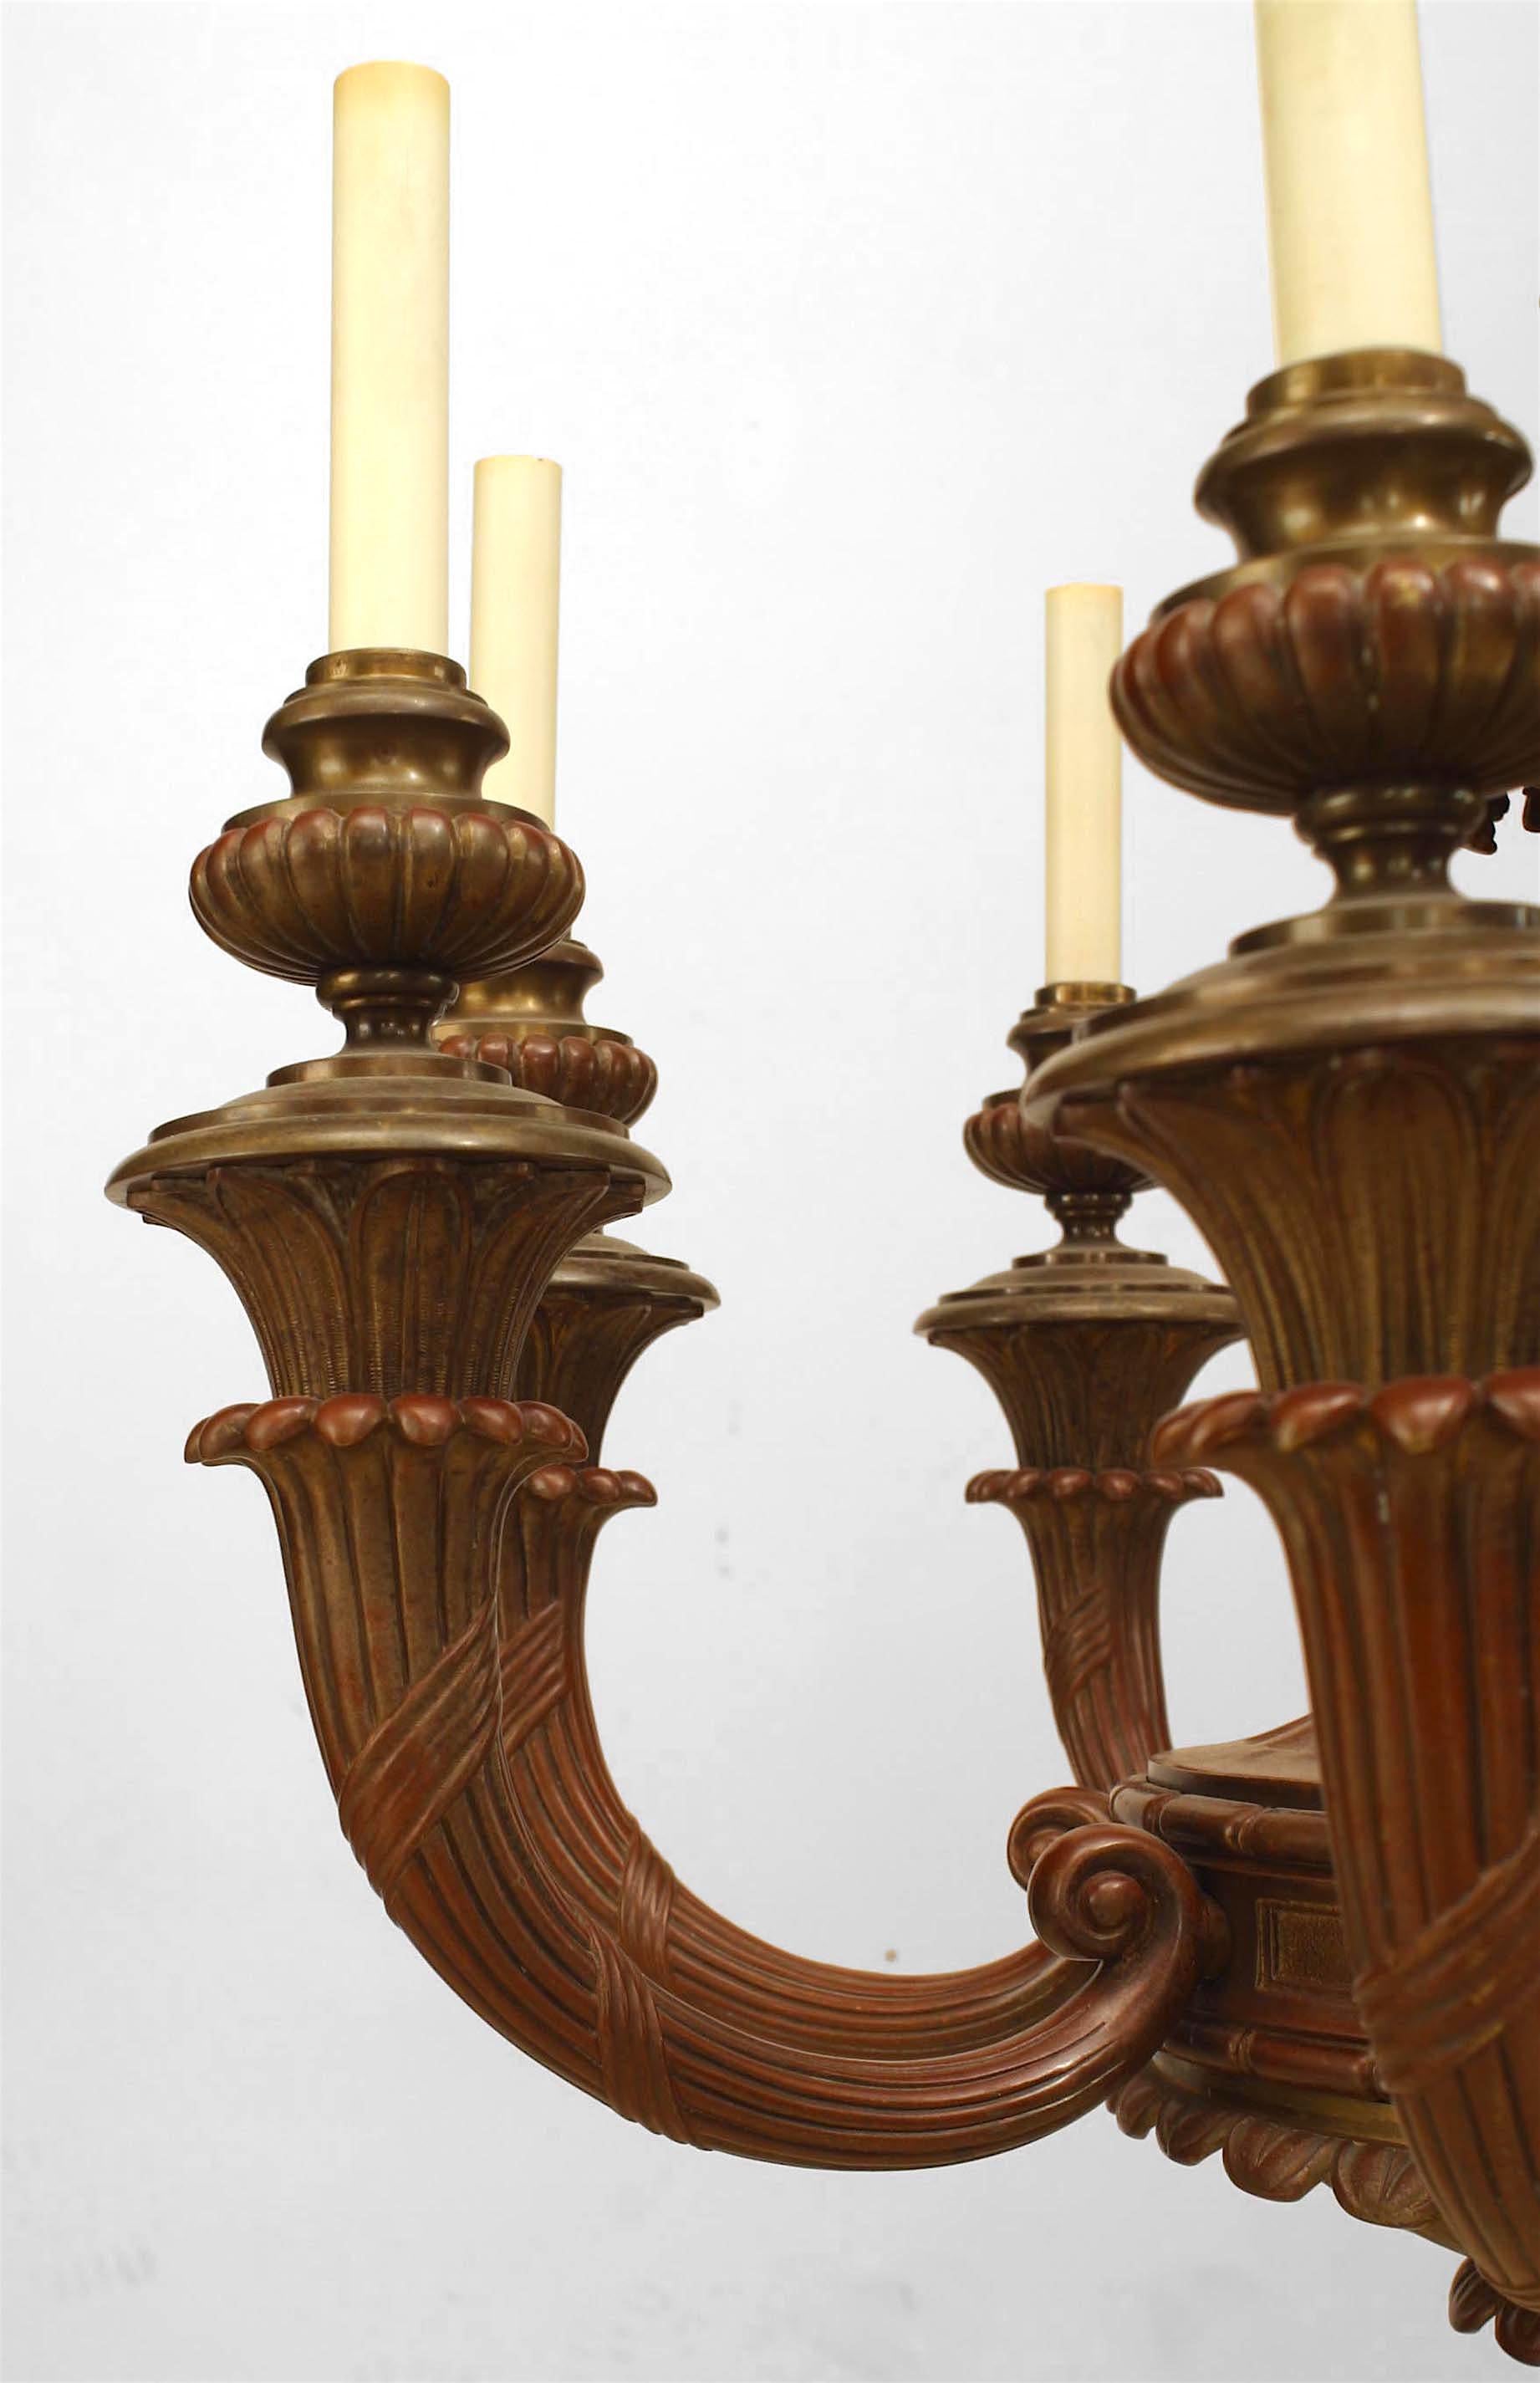 American Victorian (19th-20th century) painted bronze eight-light chandelier with scrolling fluted arms.
 